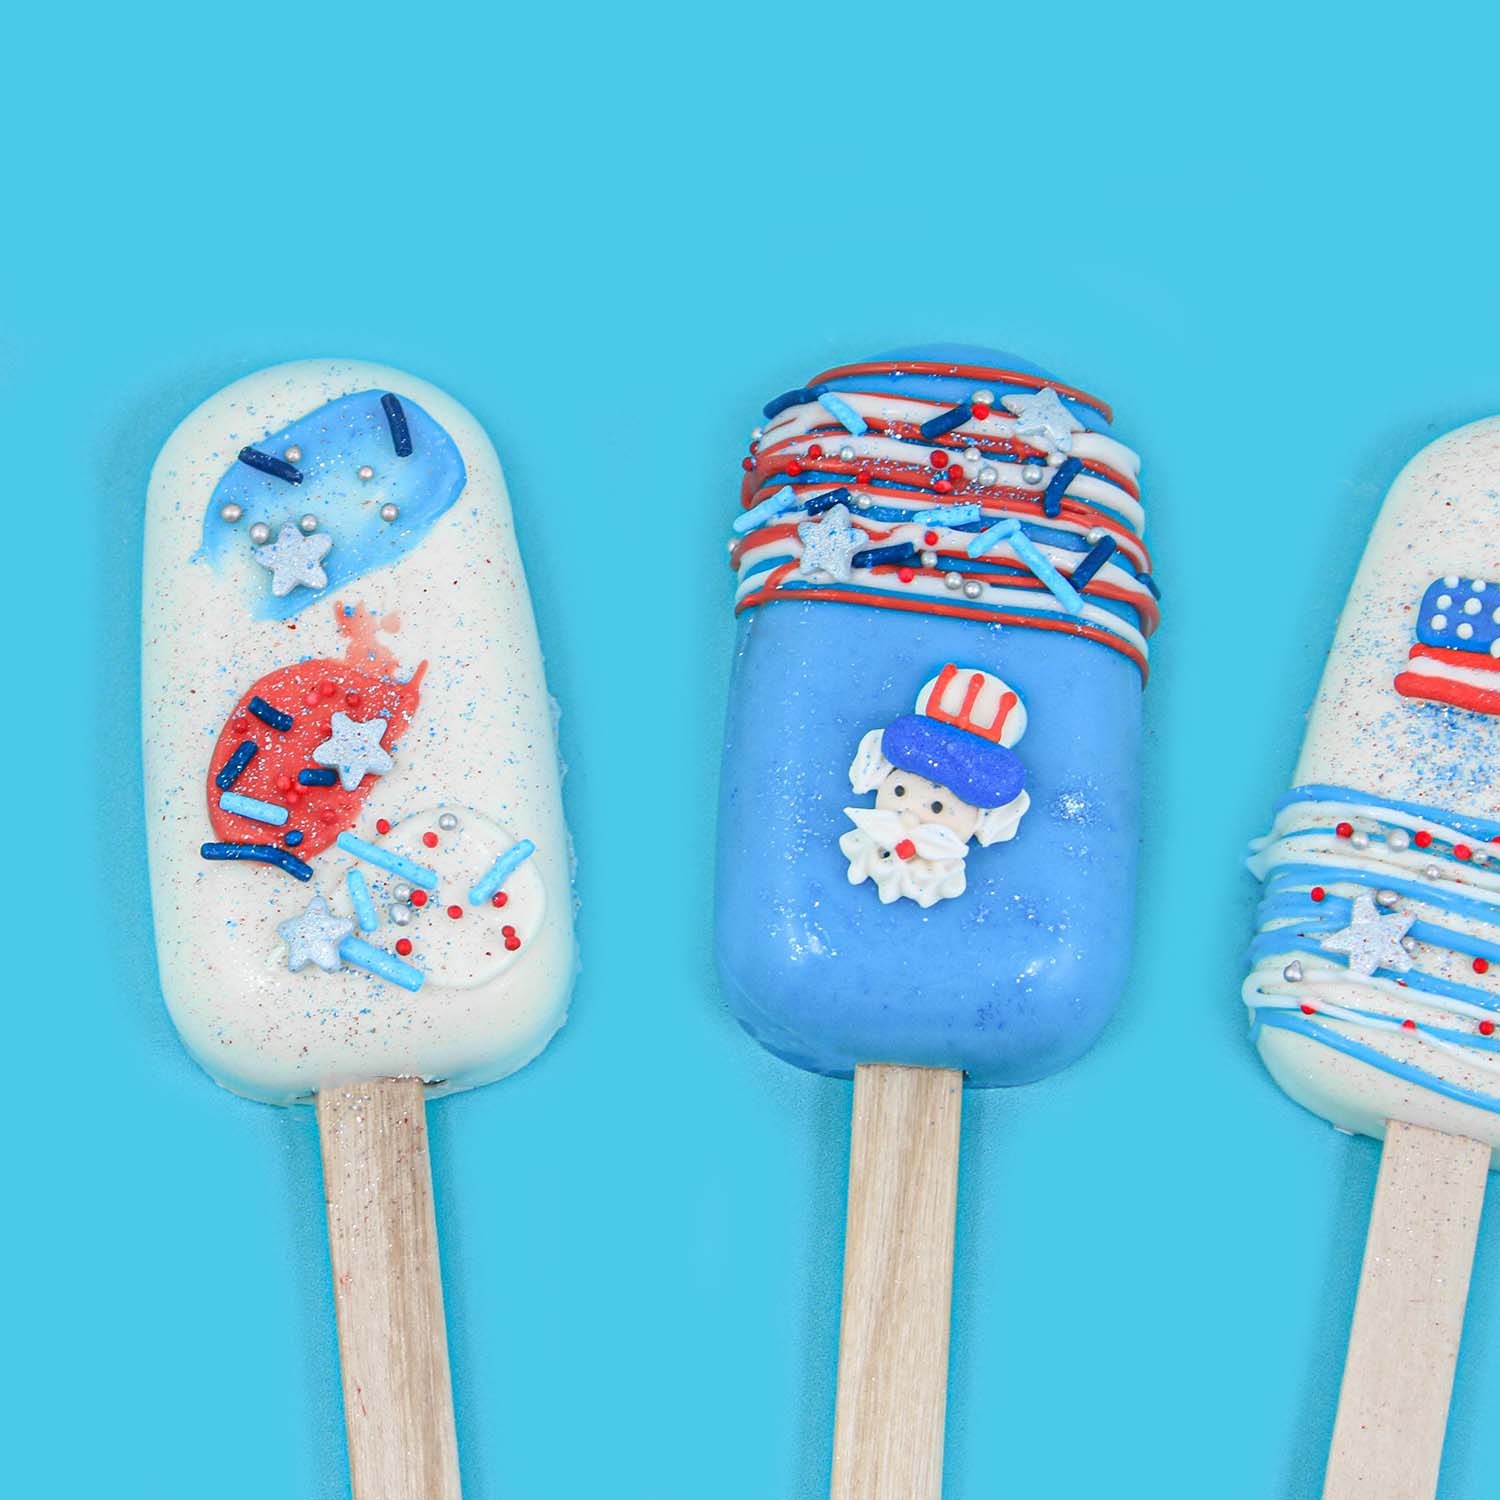 uncle sam and royal icing stars adorned cakesicles